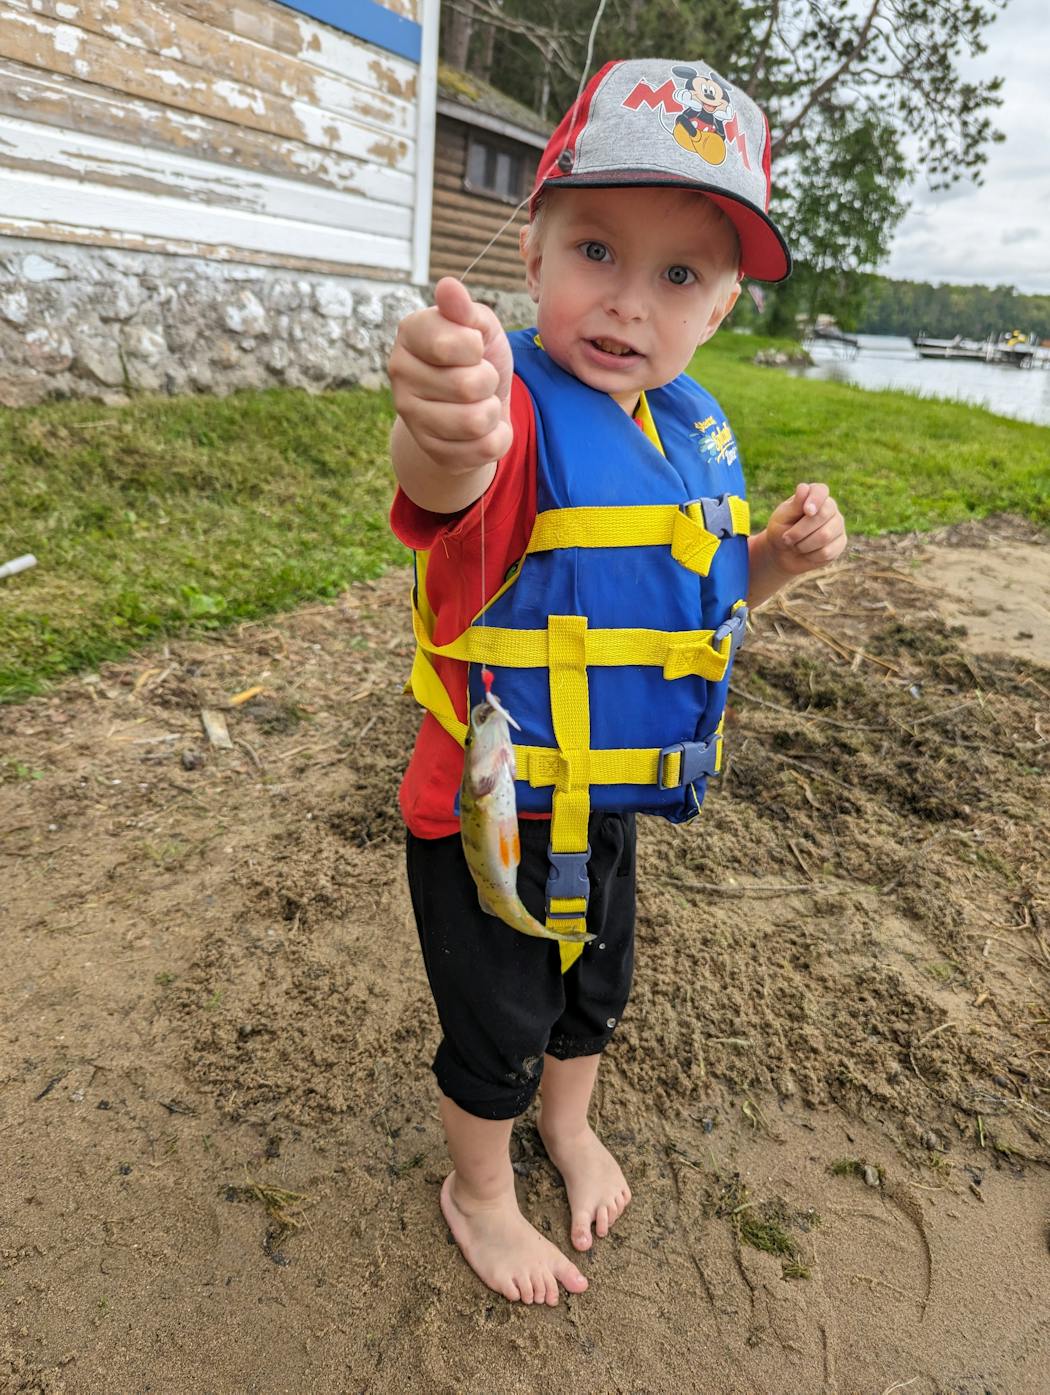 Barrett caught his first fish, dangling a worm and hook from a dock on Pokegama Lake to fool a perch.